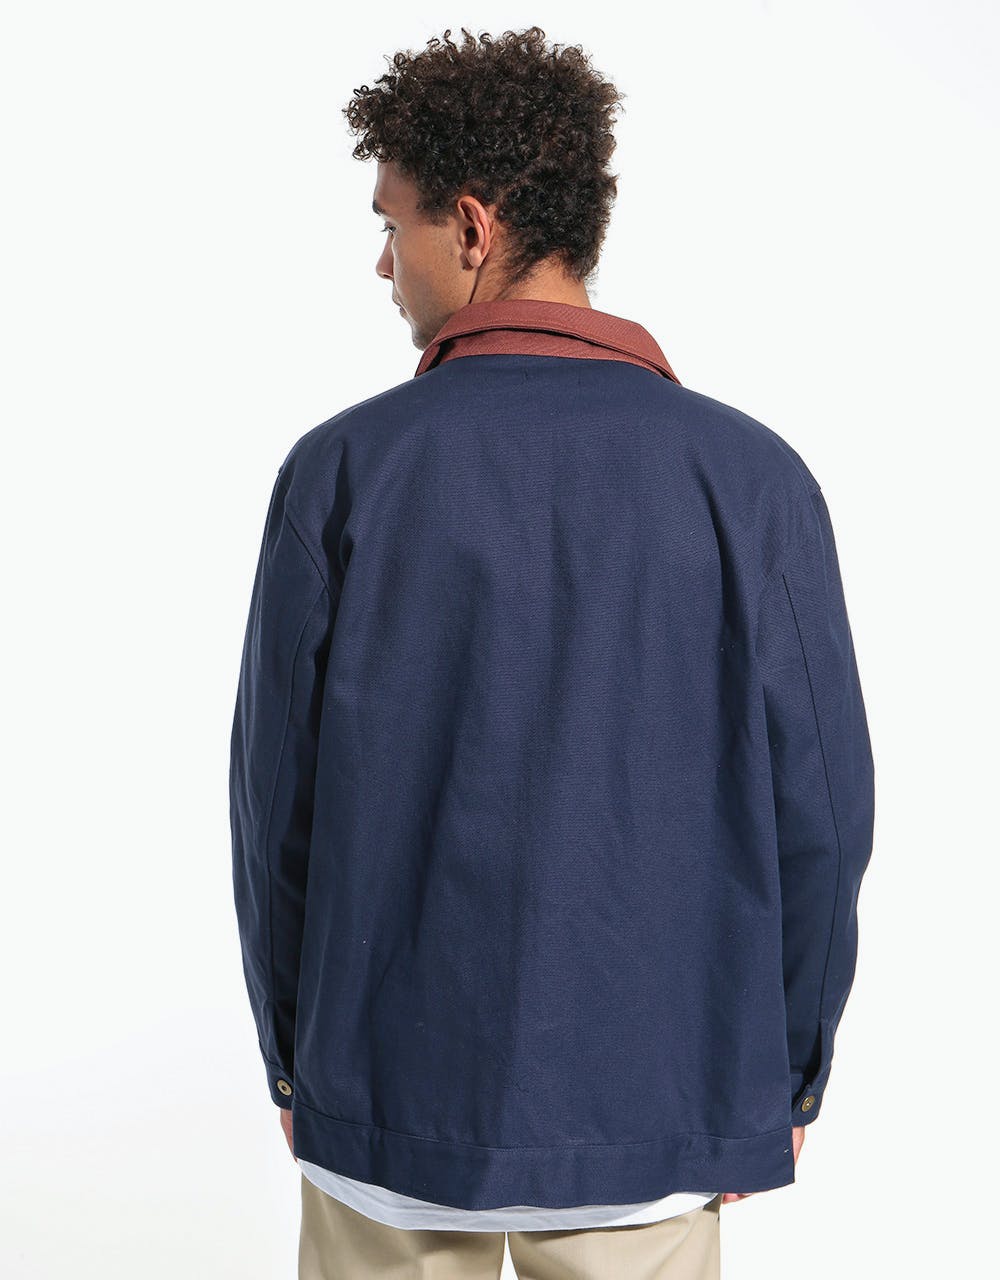 Pass Port Workers Late Jacket - Navy